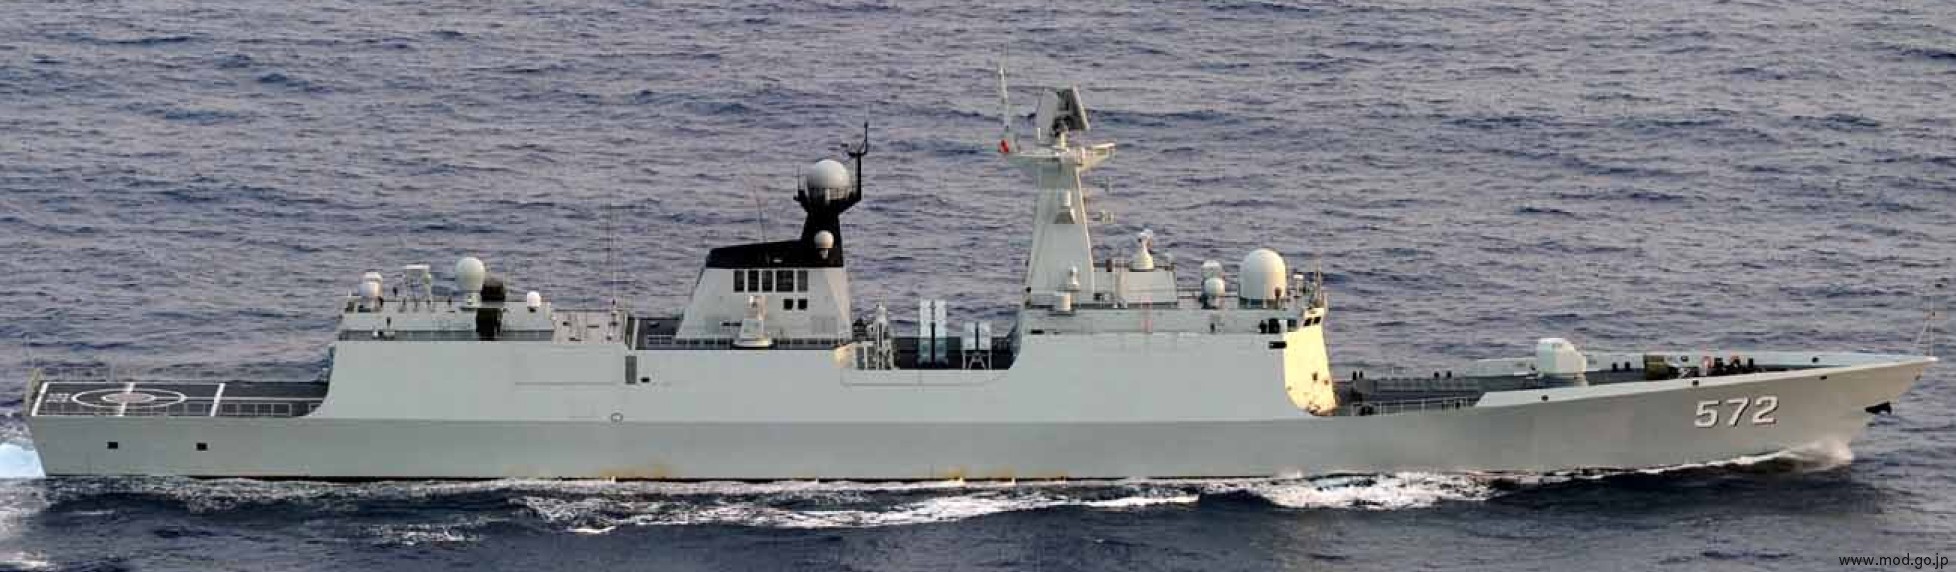 ffg-572 plans hengshui type 054a jiangkai ii class guided missile frigate china people's liberation army navy 02